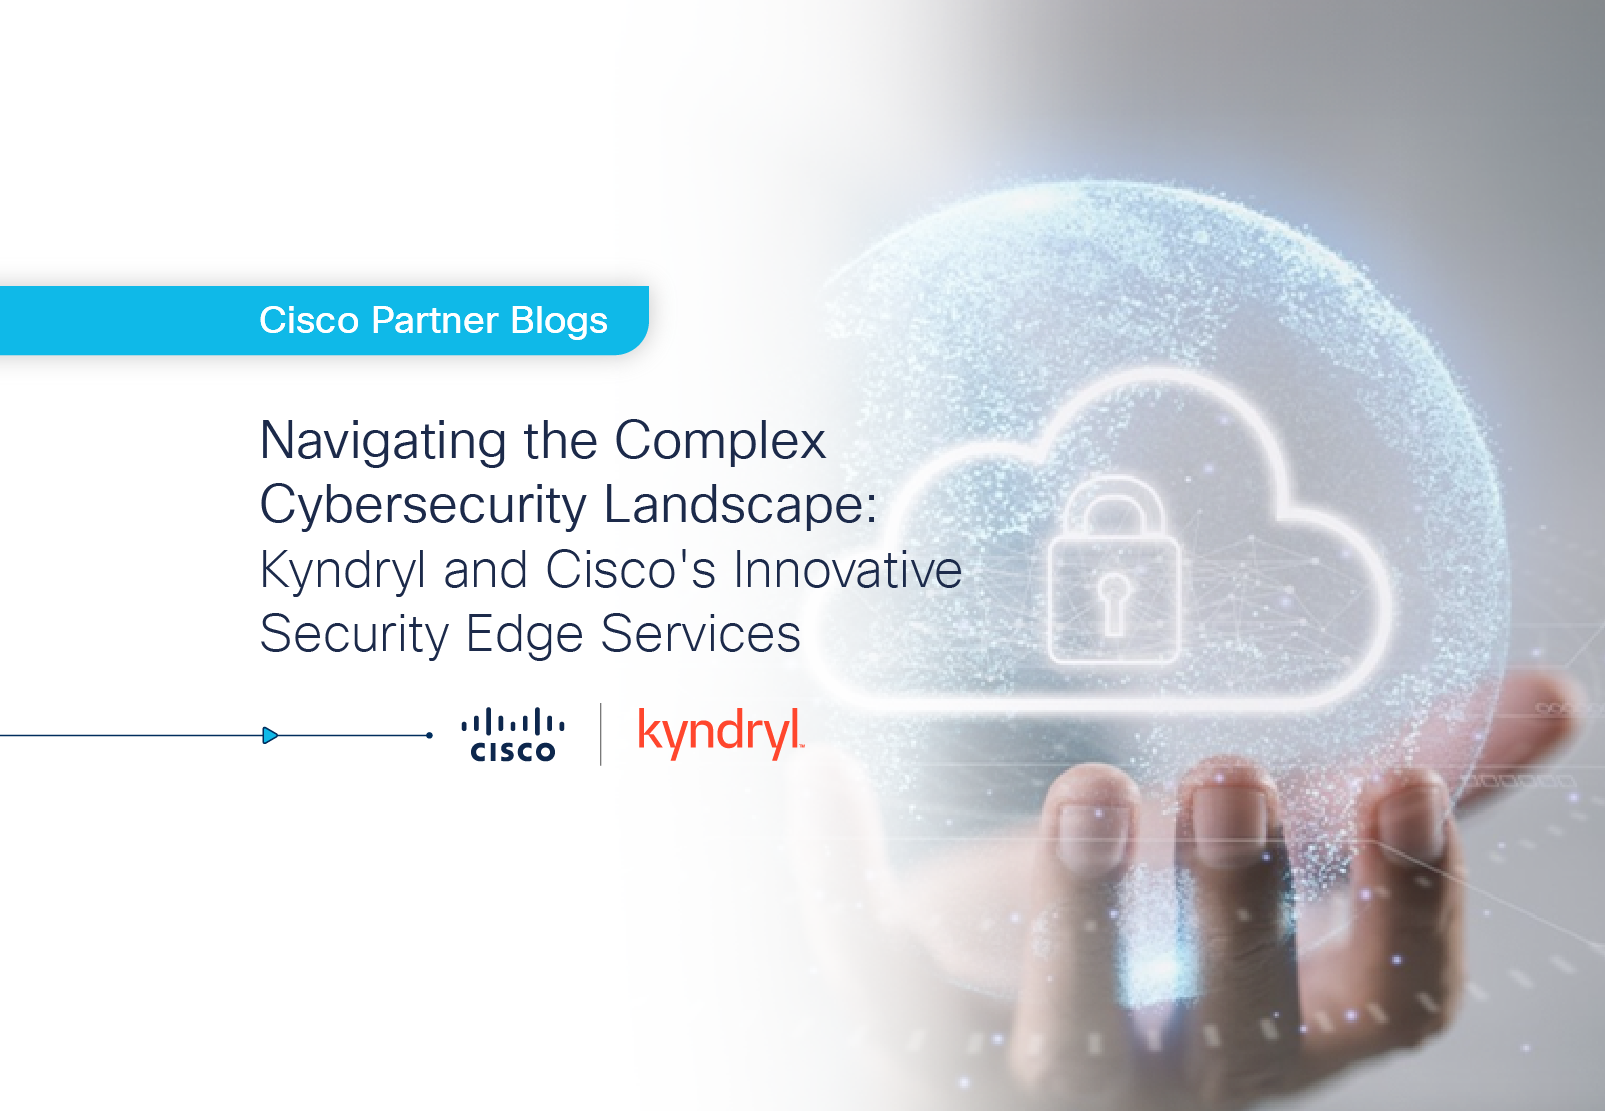 Navigating the Complex Cybersecurity Landscape: Kyndryl and Cisco’s Innovative Security Edge Services